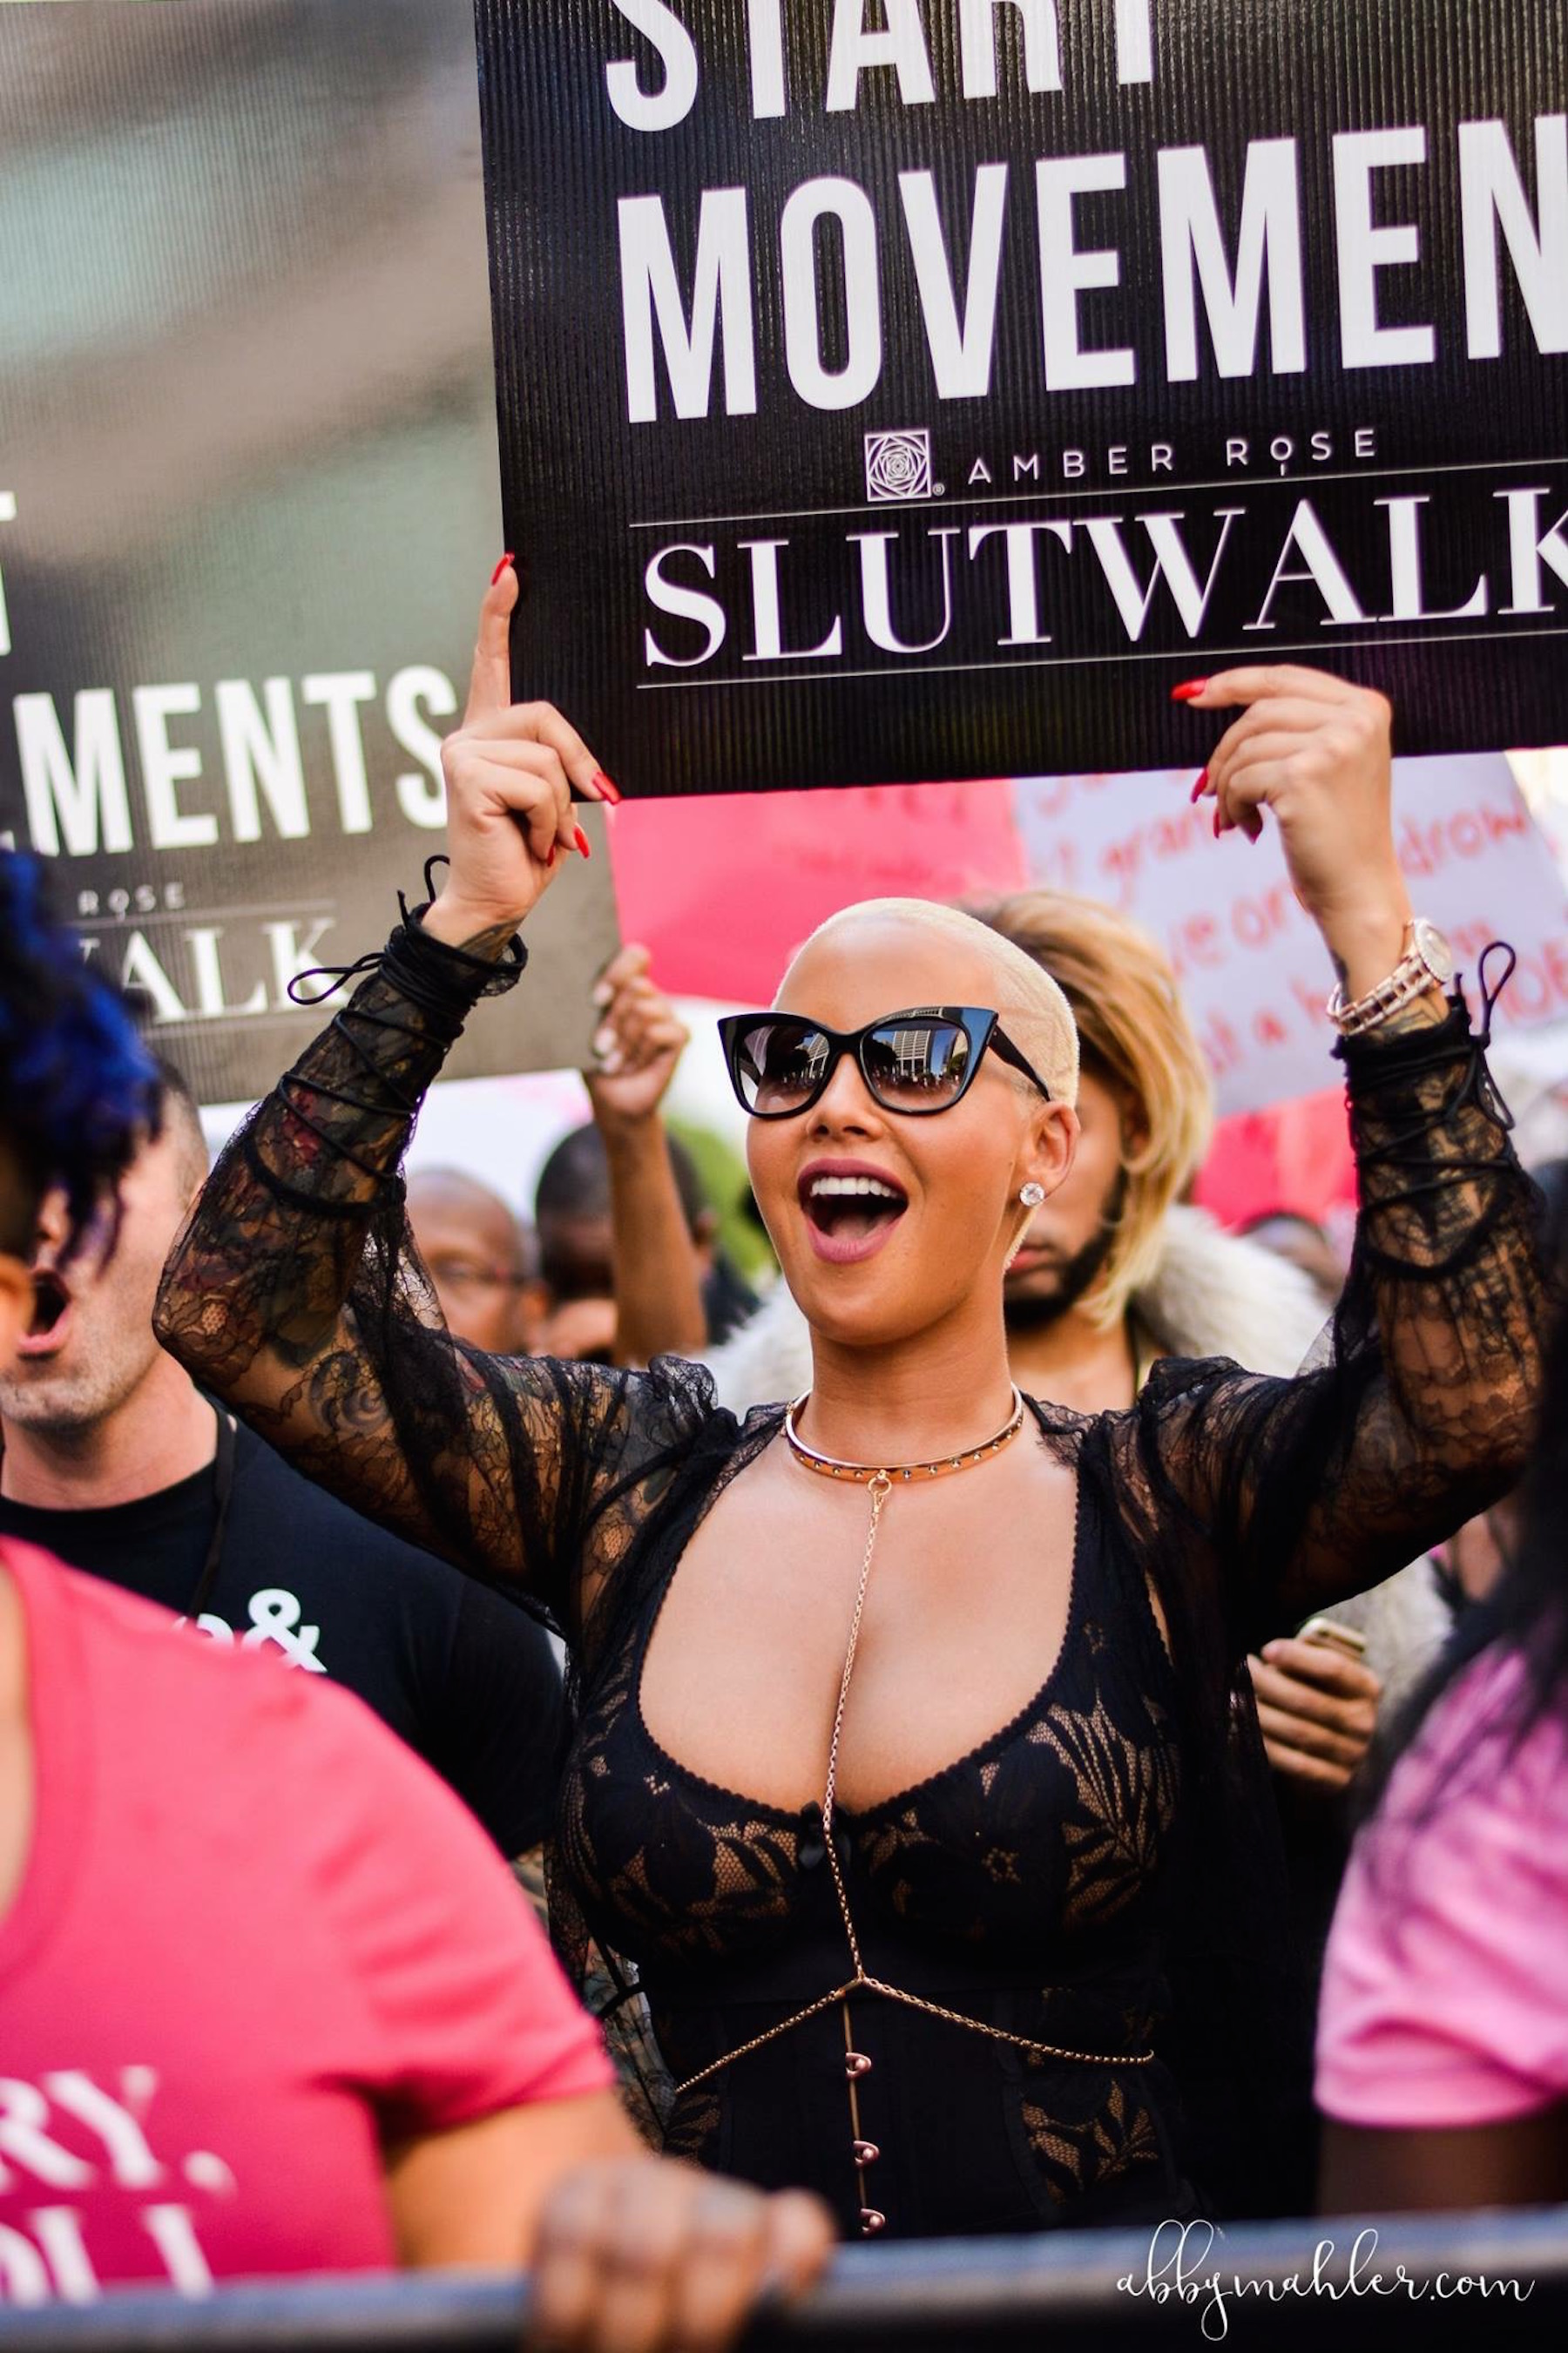 Amber Rose Wants Melania Trump to March at Her SlutWalk